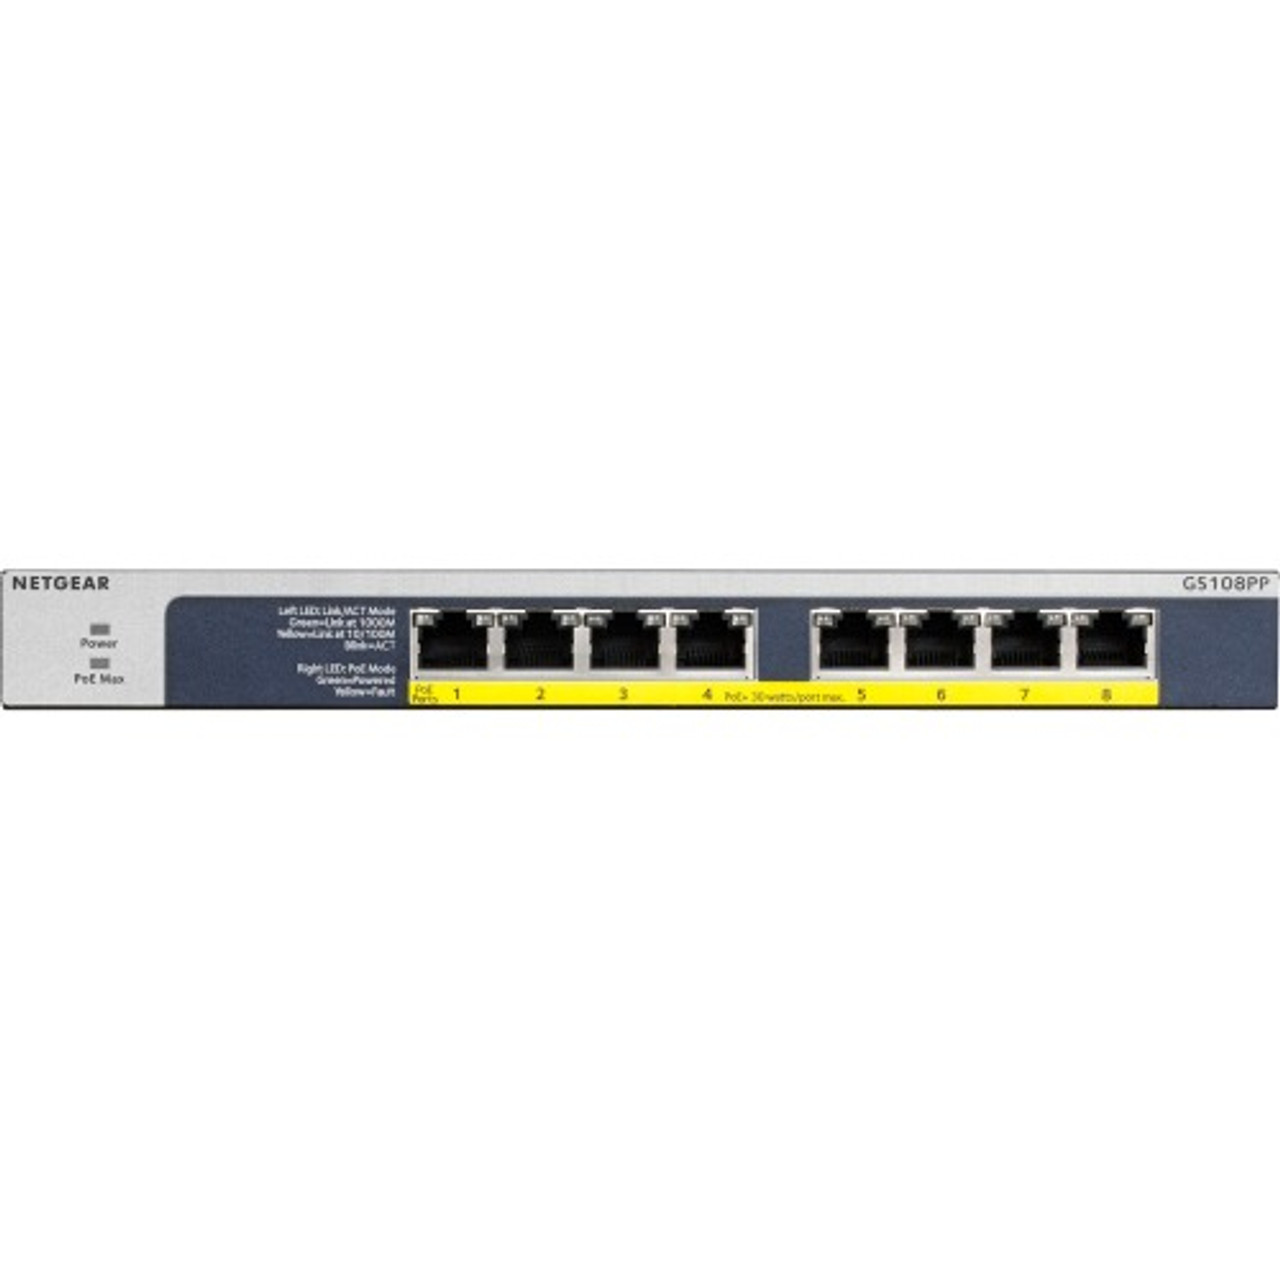 GS108PP-100AJS Netgear GS108PP Ethernet Switch 8 x Gigabit Ethernet Network Twisted Pair 2 Layer Supported Rack-mountable, Desktop (Refurbished)